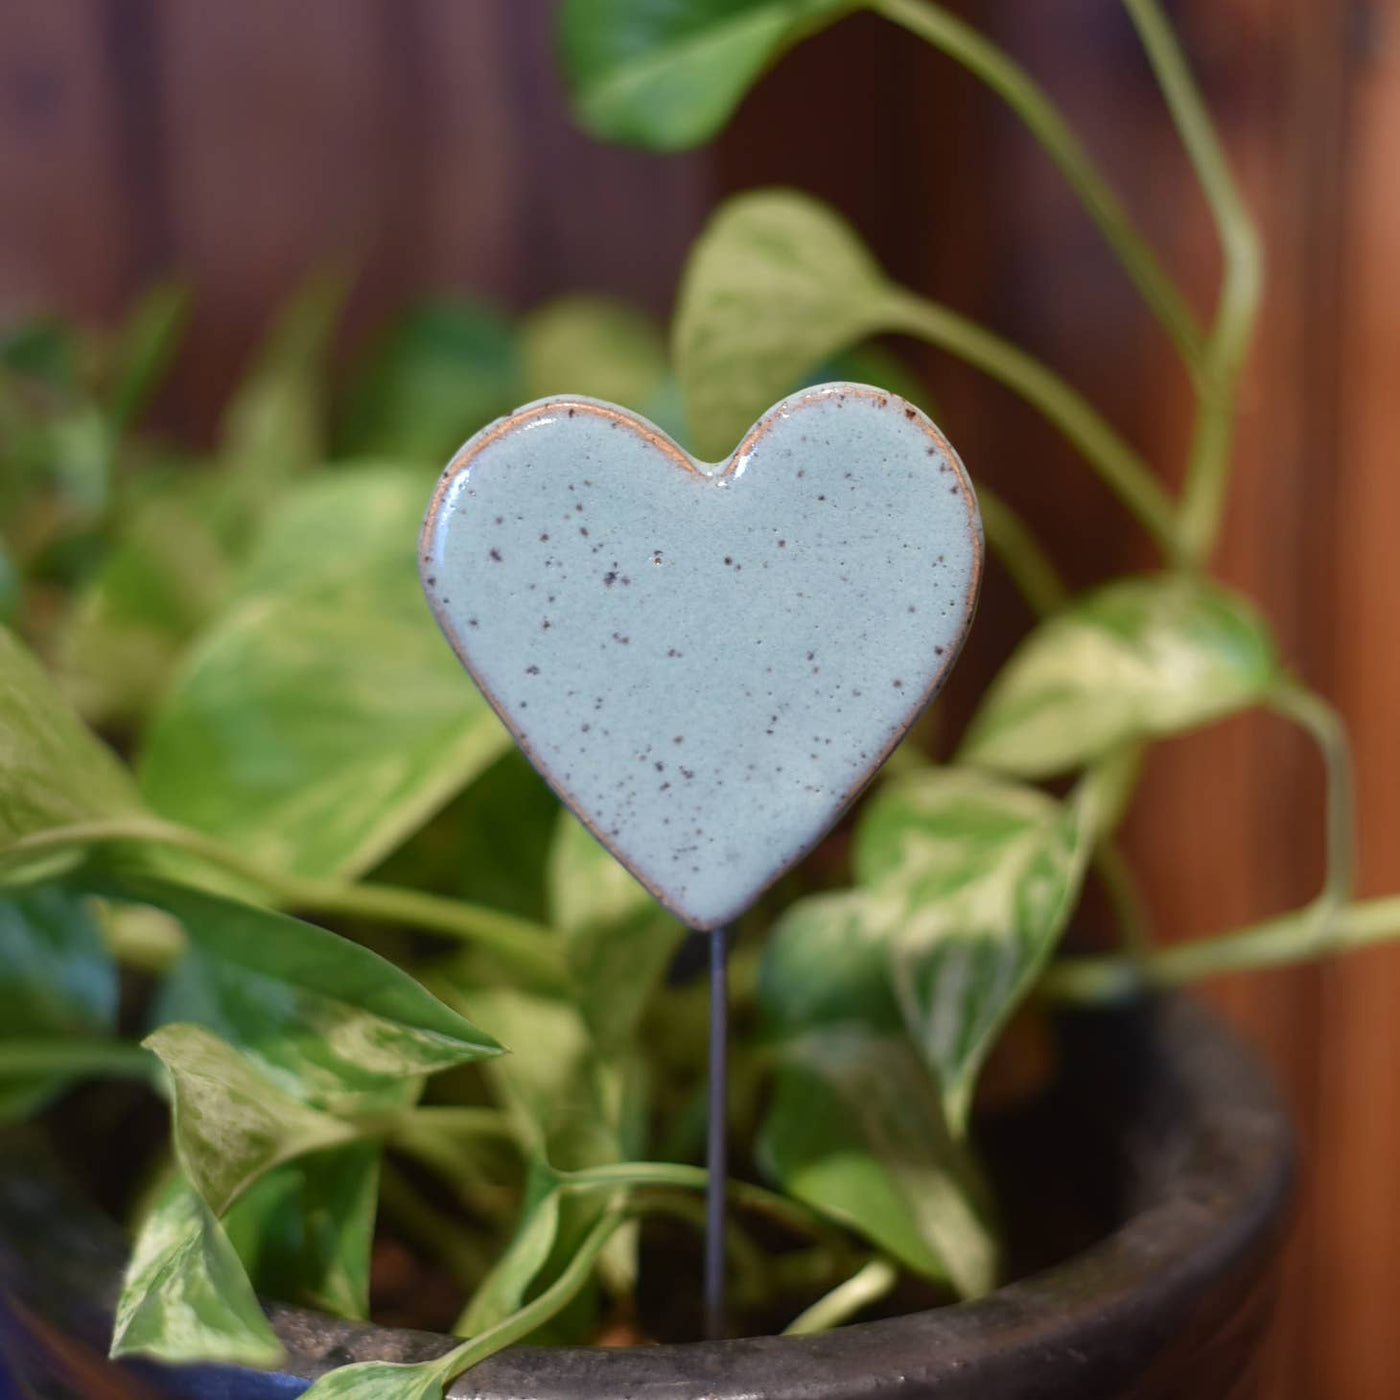 Ceramic glazed heart on steel stick, sticking out of a plant